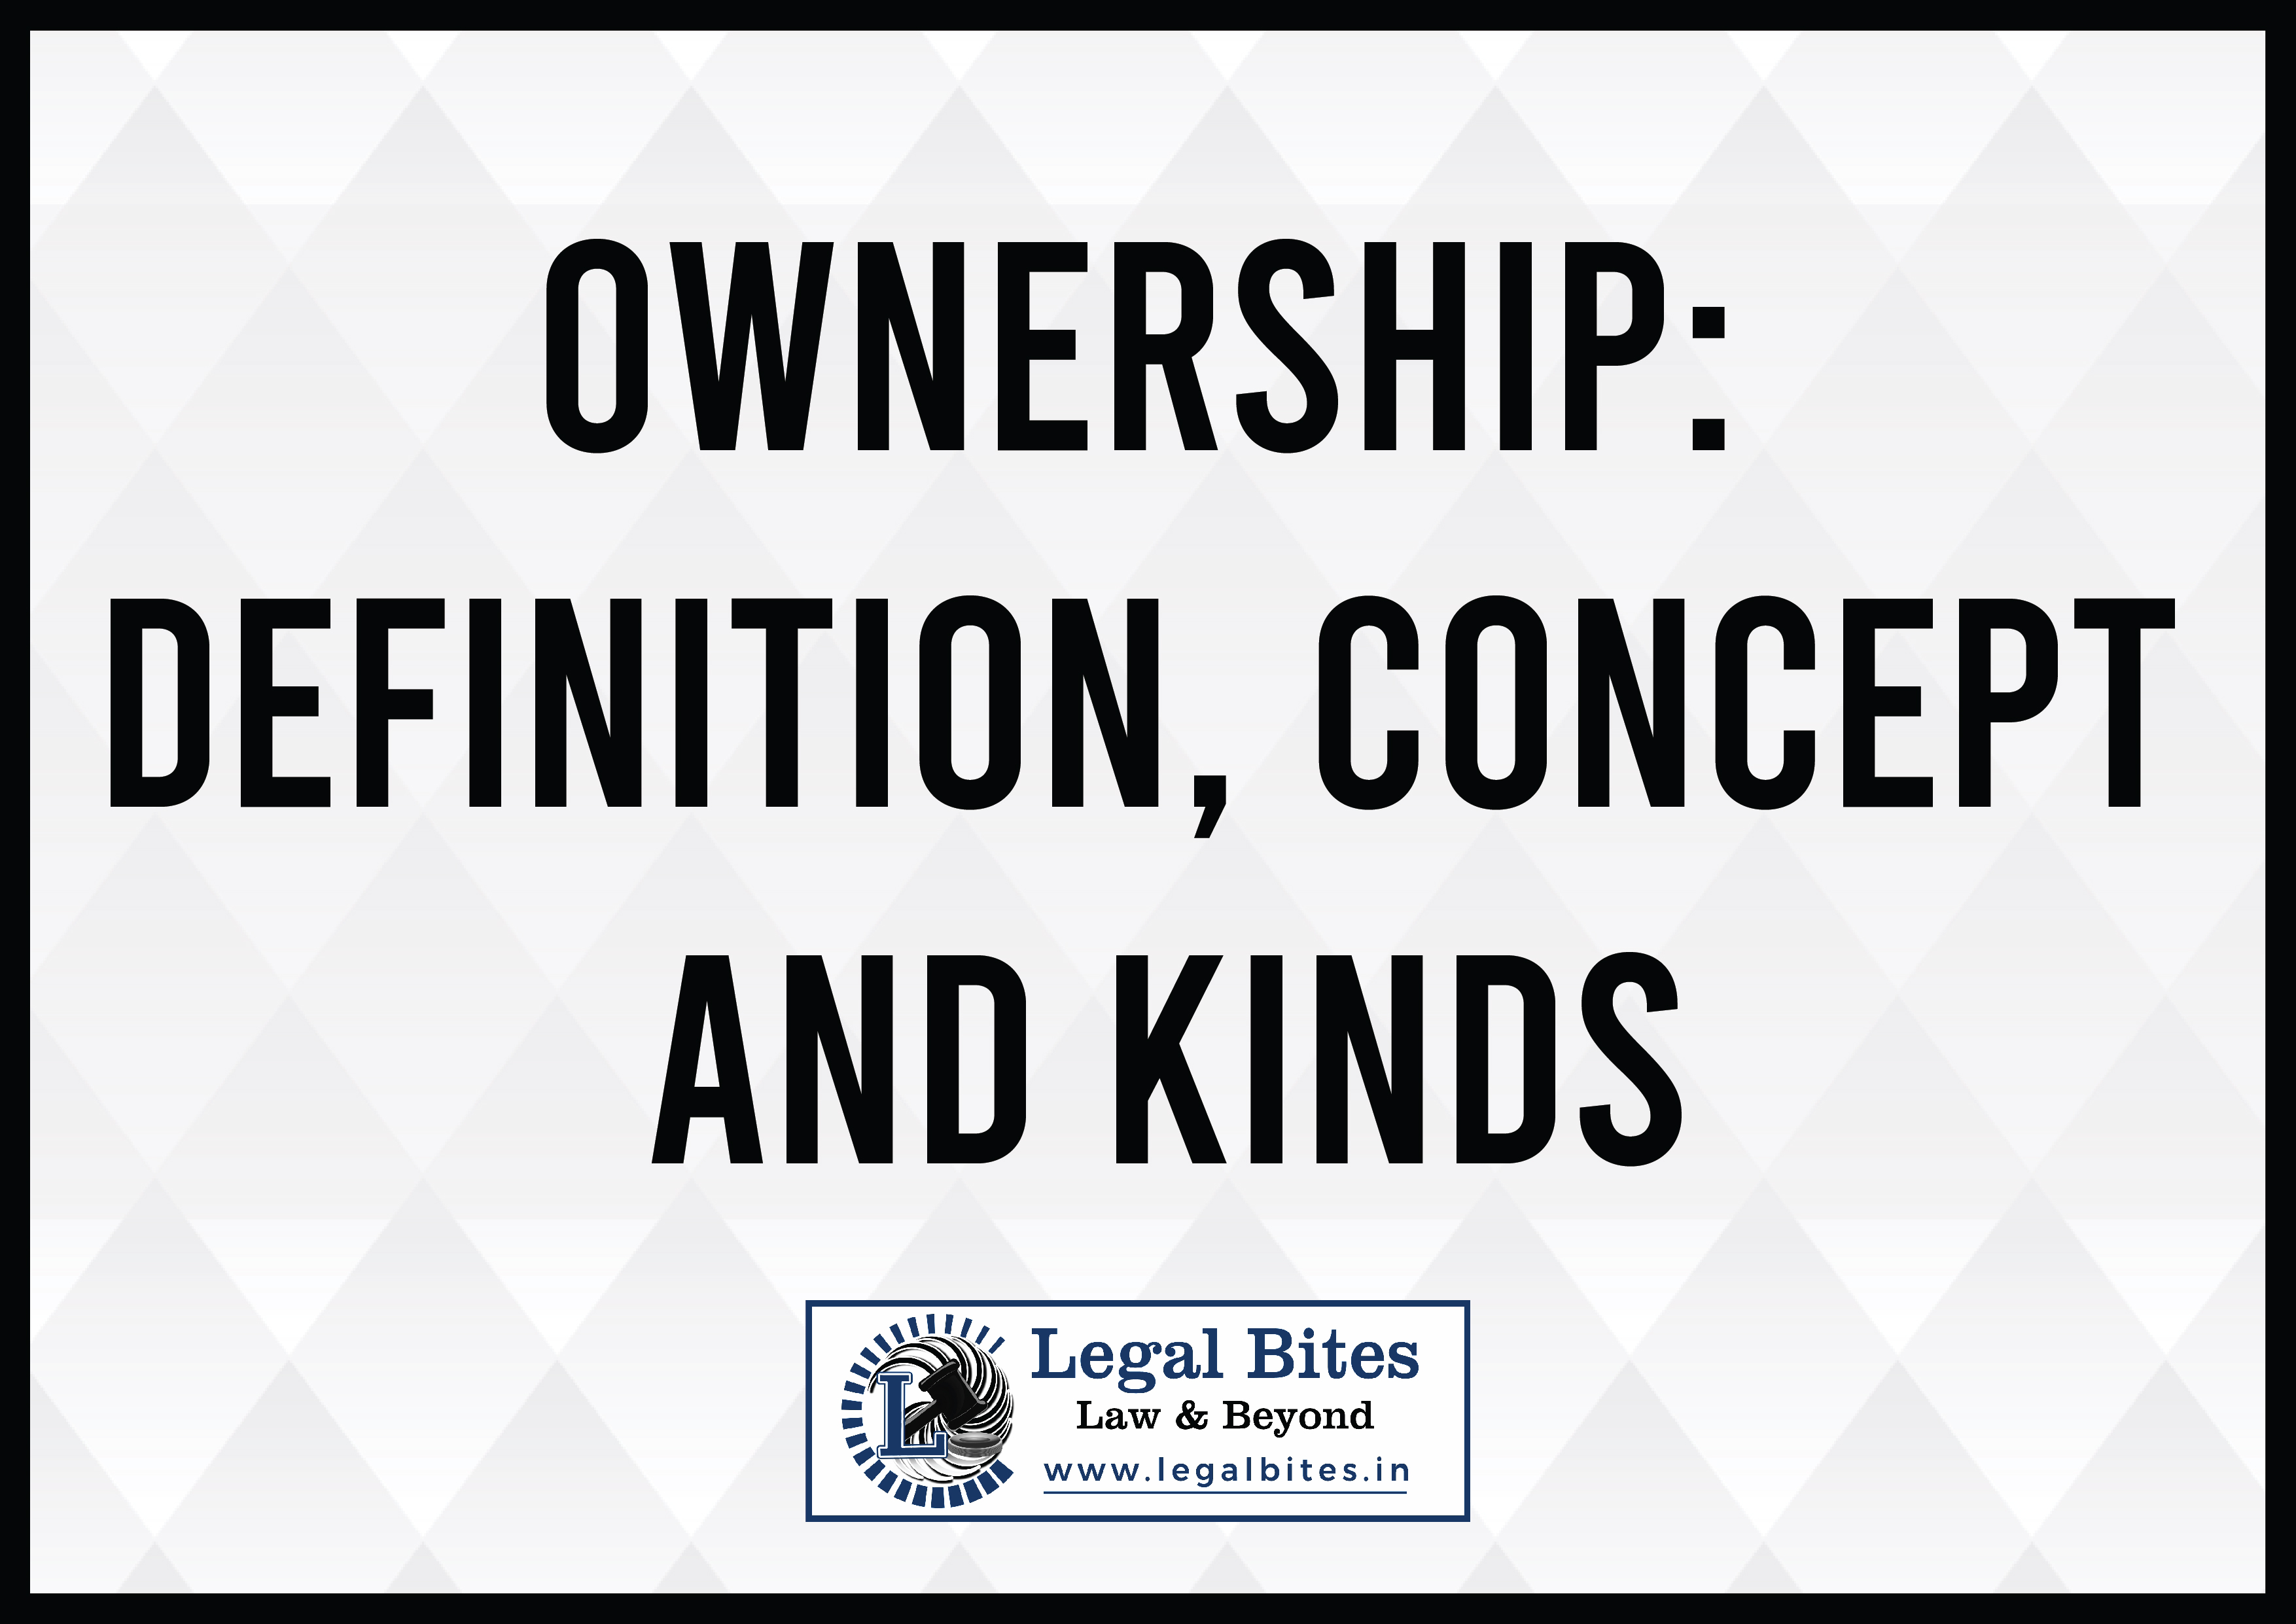 Ownership: Definition, Concept and Kinds